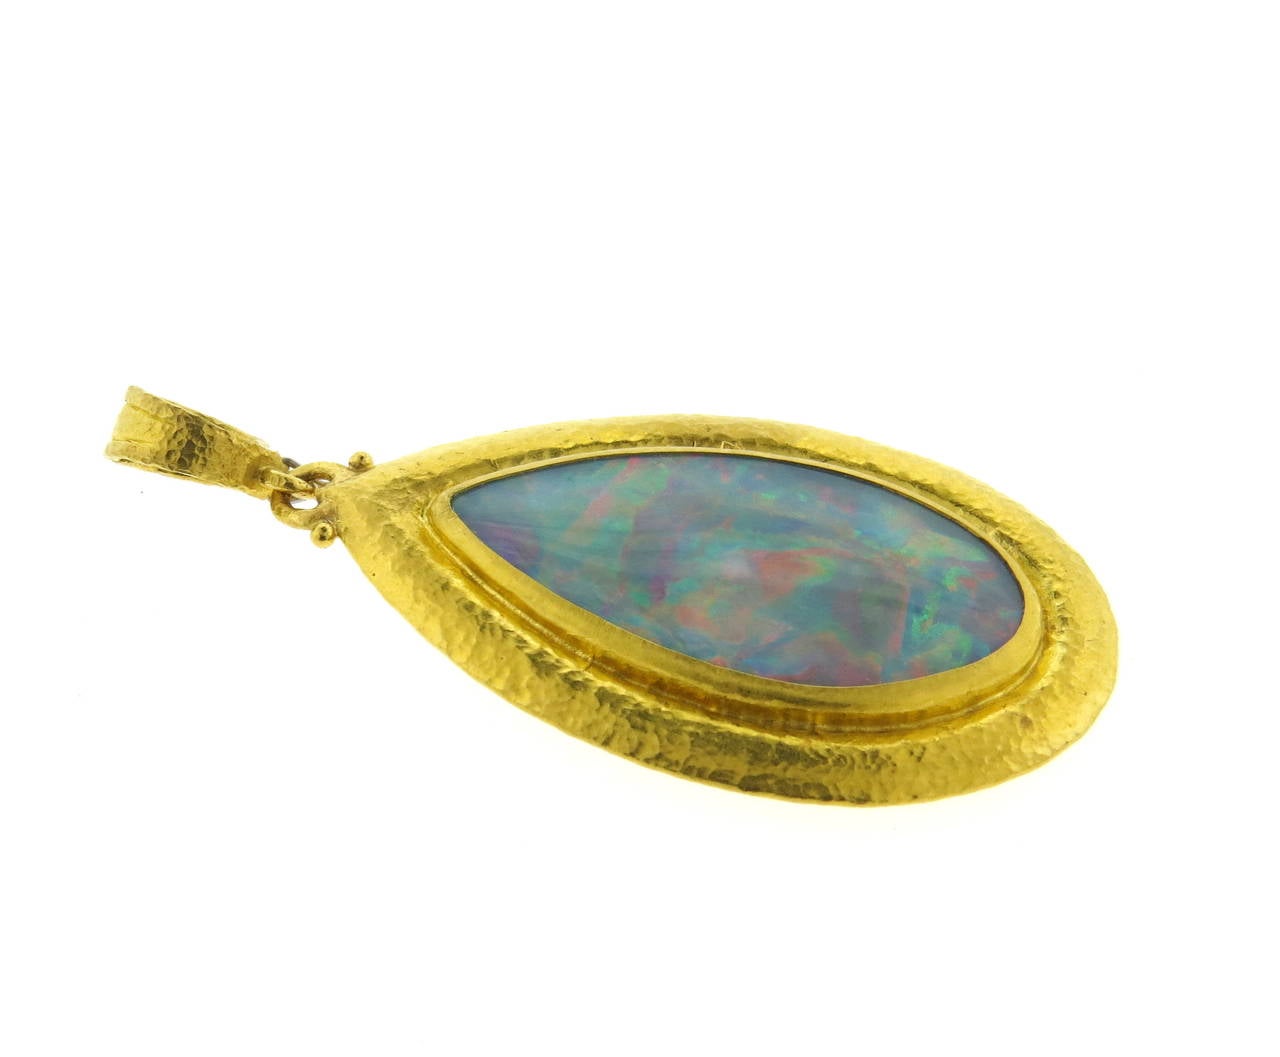 Large 24k gold enhancer pendant, crafted by Gurhan, set with  46mm x 23mm opal gemstones in the center. Pendant measures 82mm with bale x 39mm (pictured chain is not included) Marked with Gurhan hallmark and PD043 0.990. Weight of the piece - 34.6